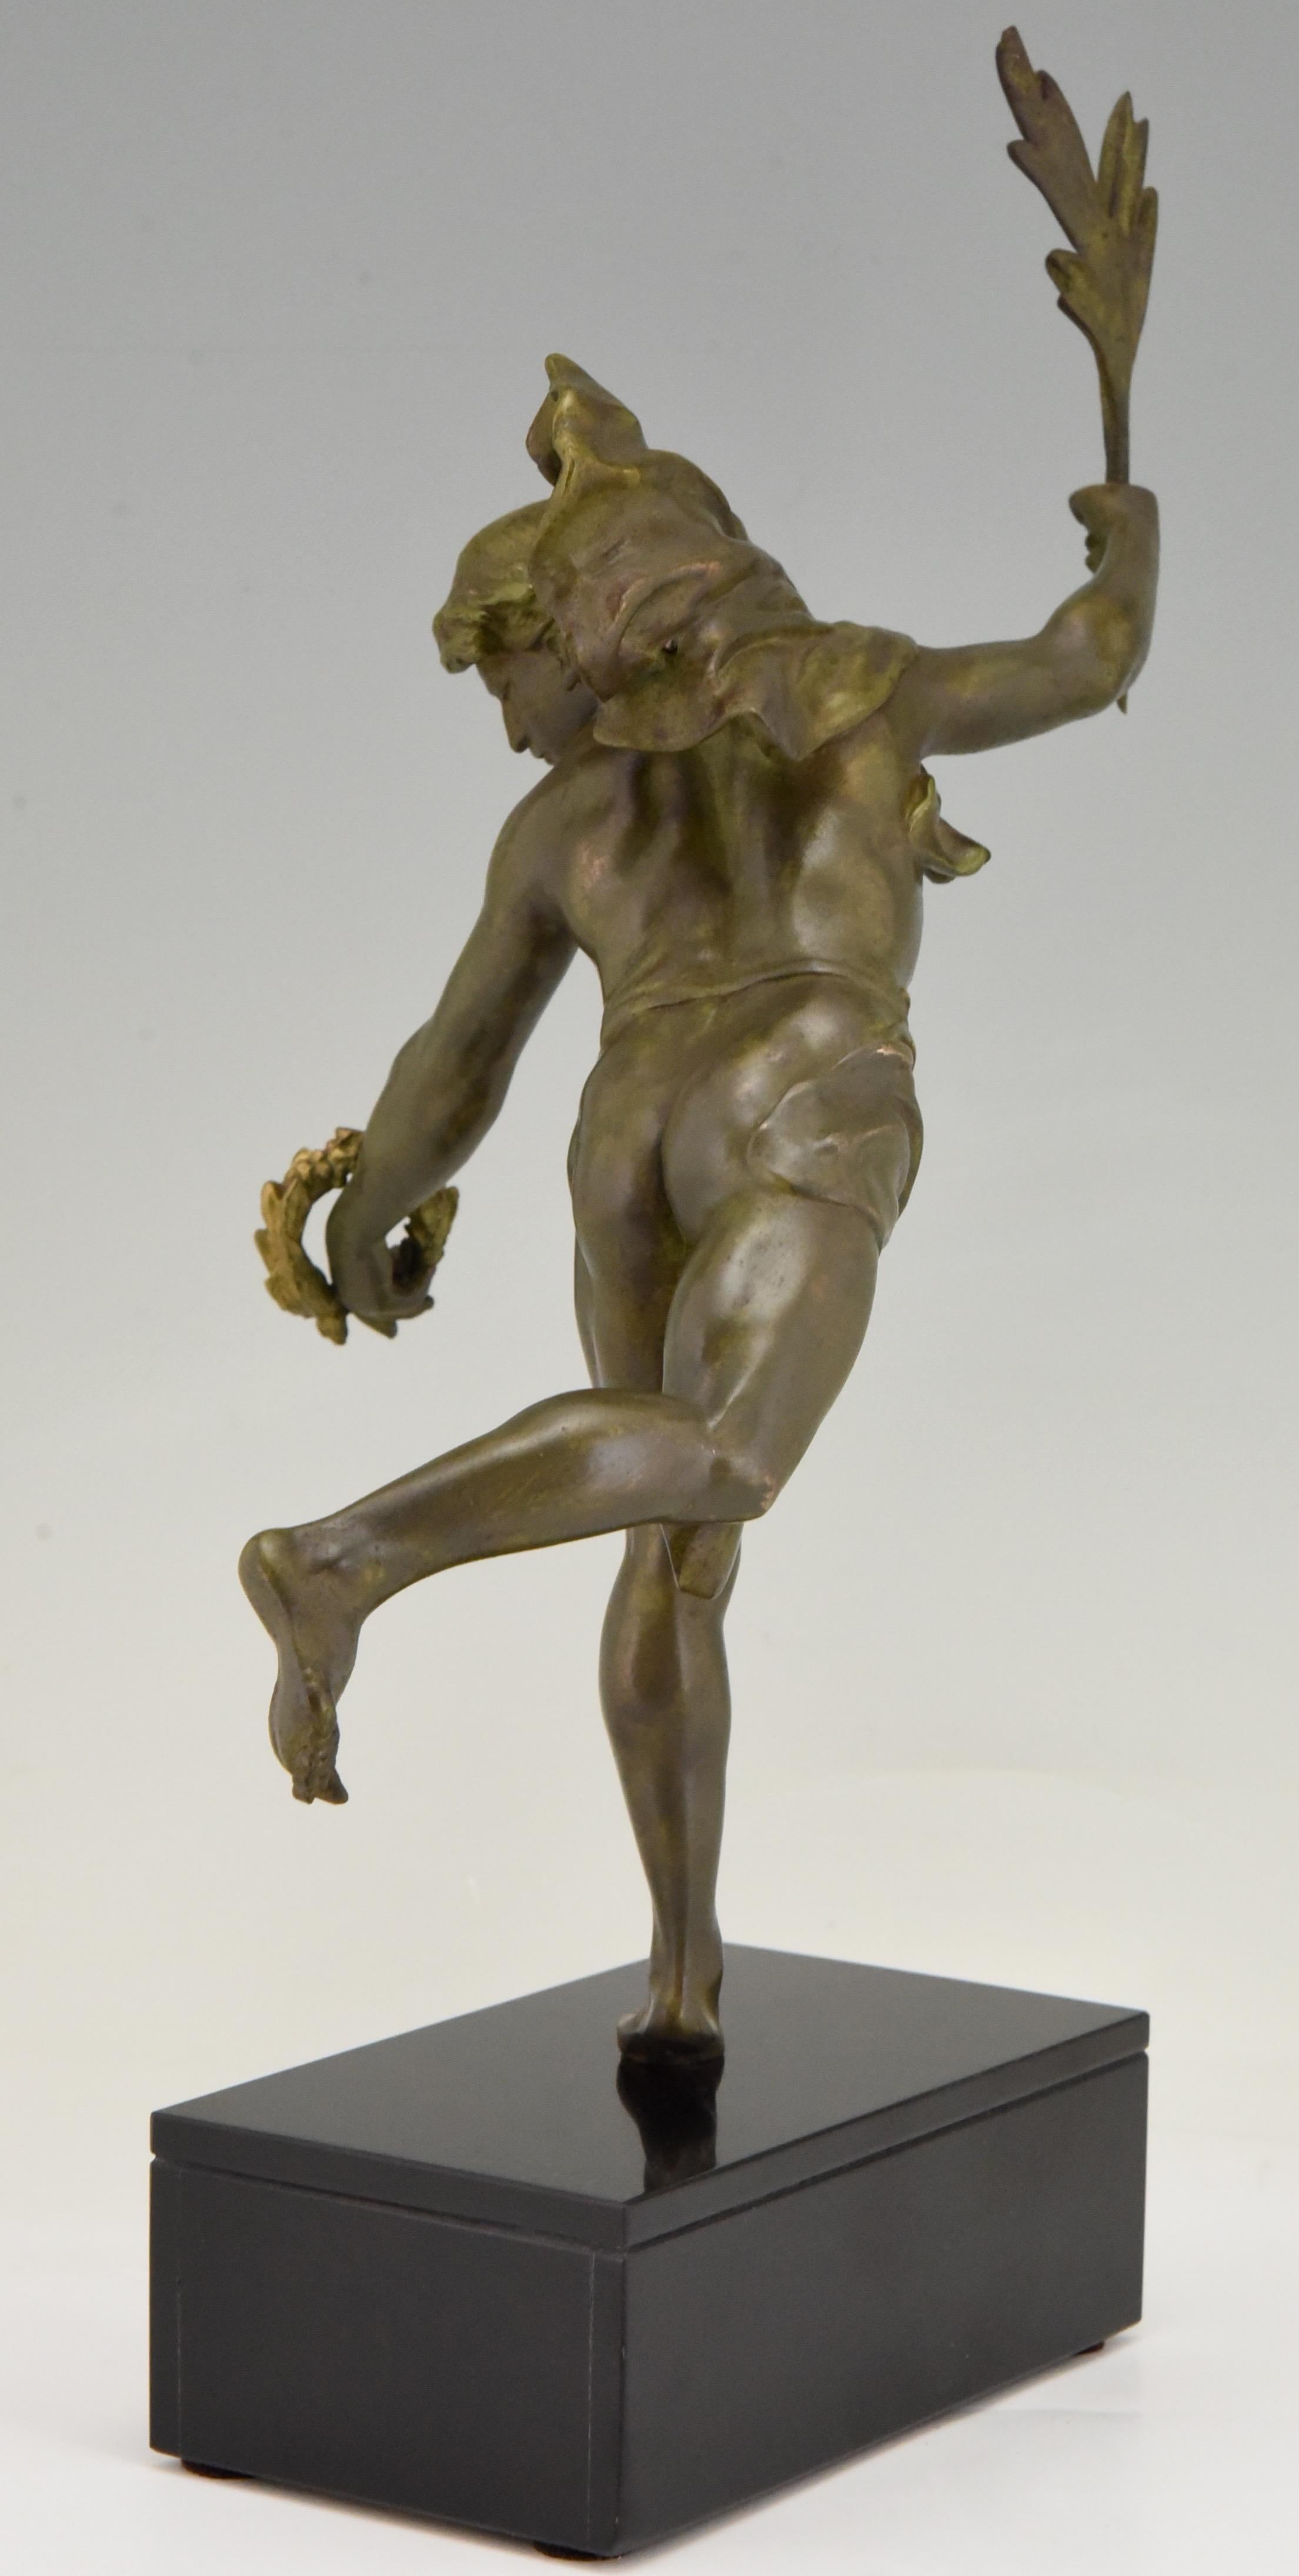 20th Century Antique Sculpture of a Man with Laurel Branch by E. Picault ca. 1900